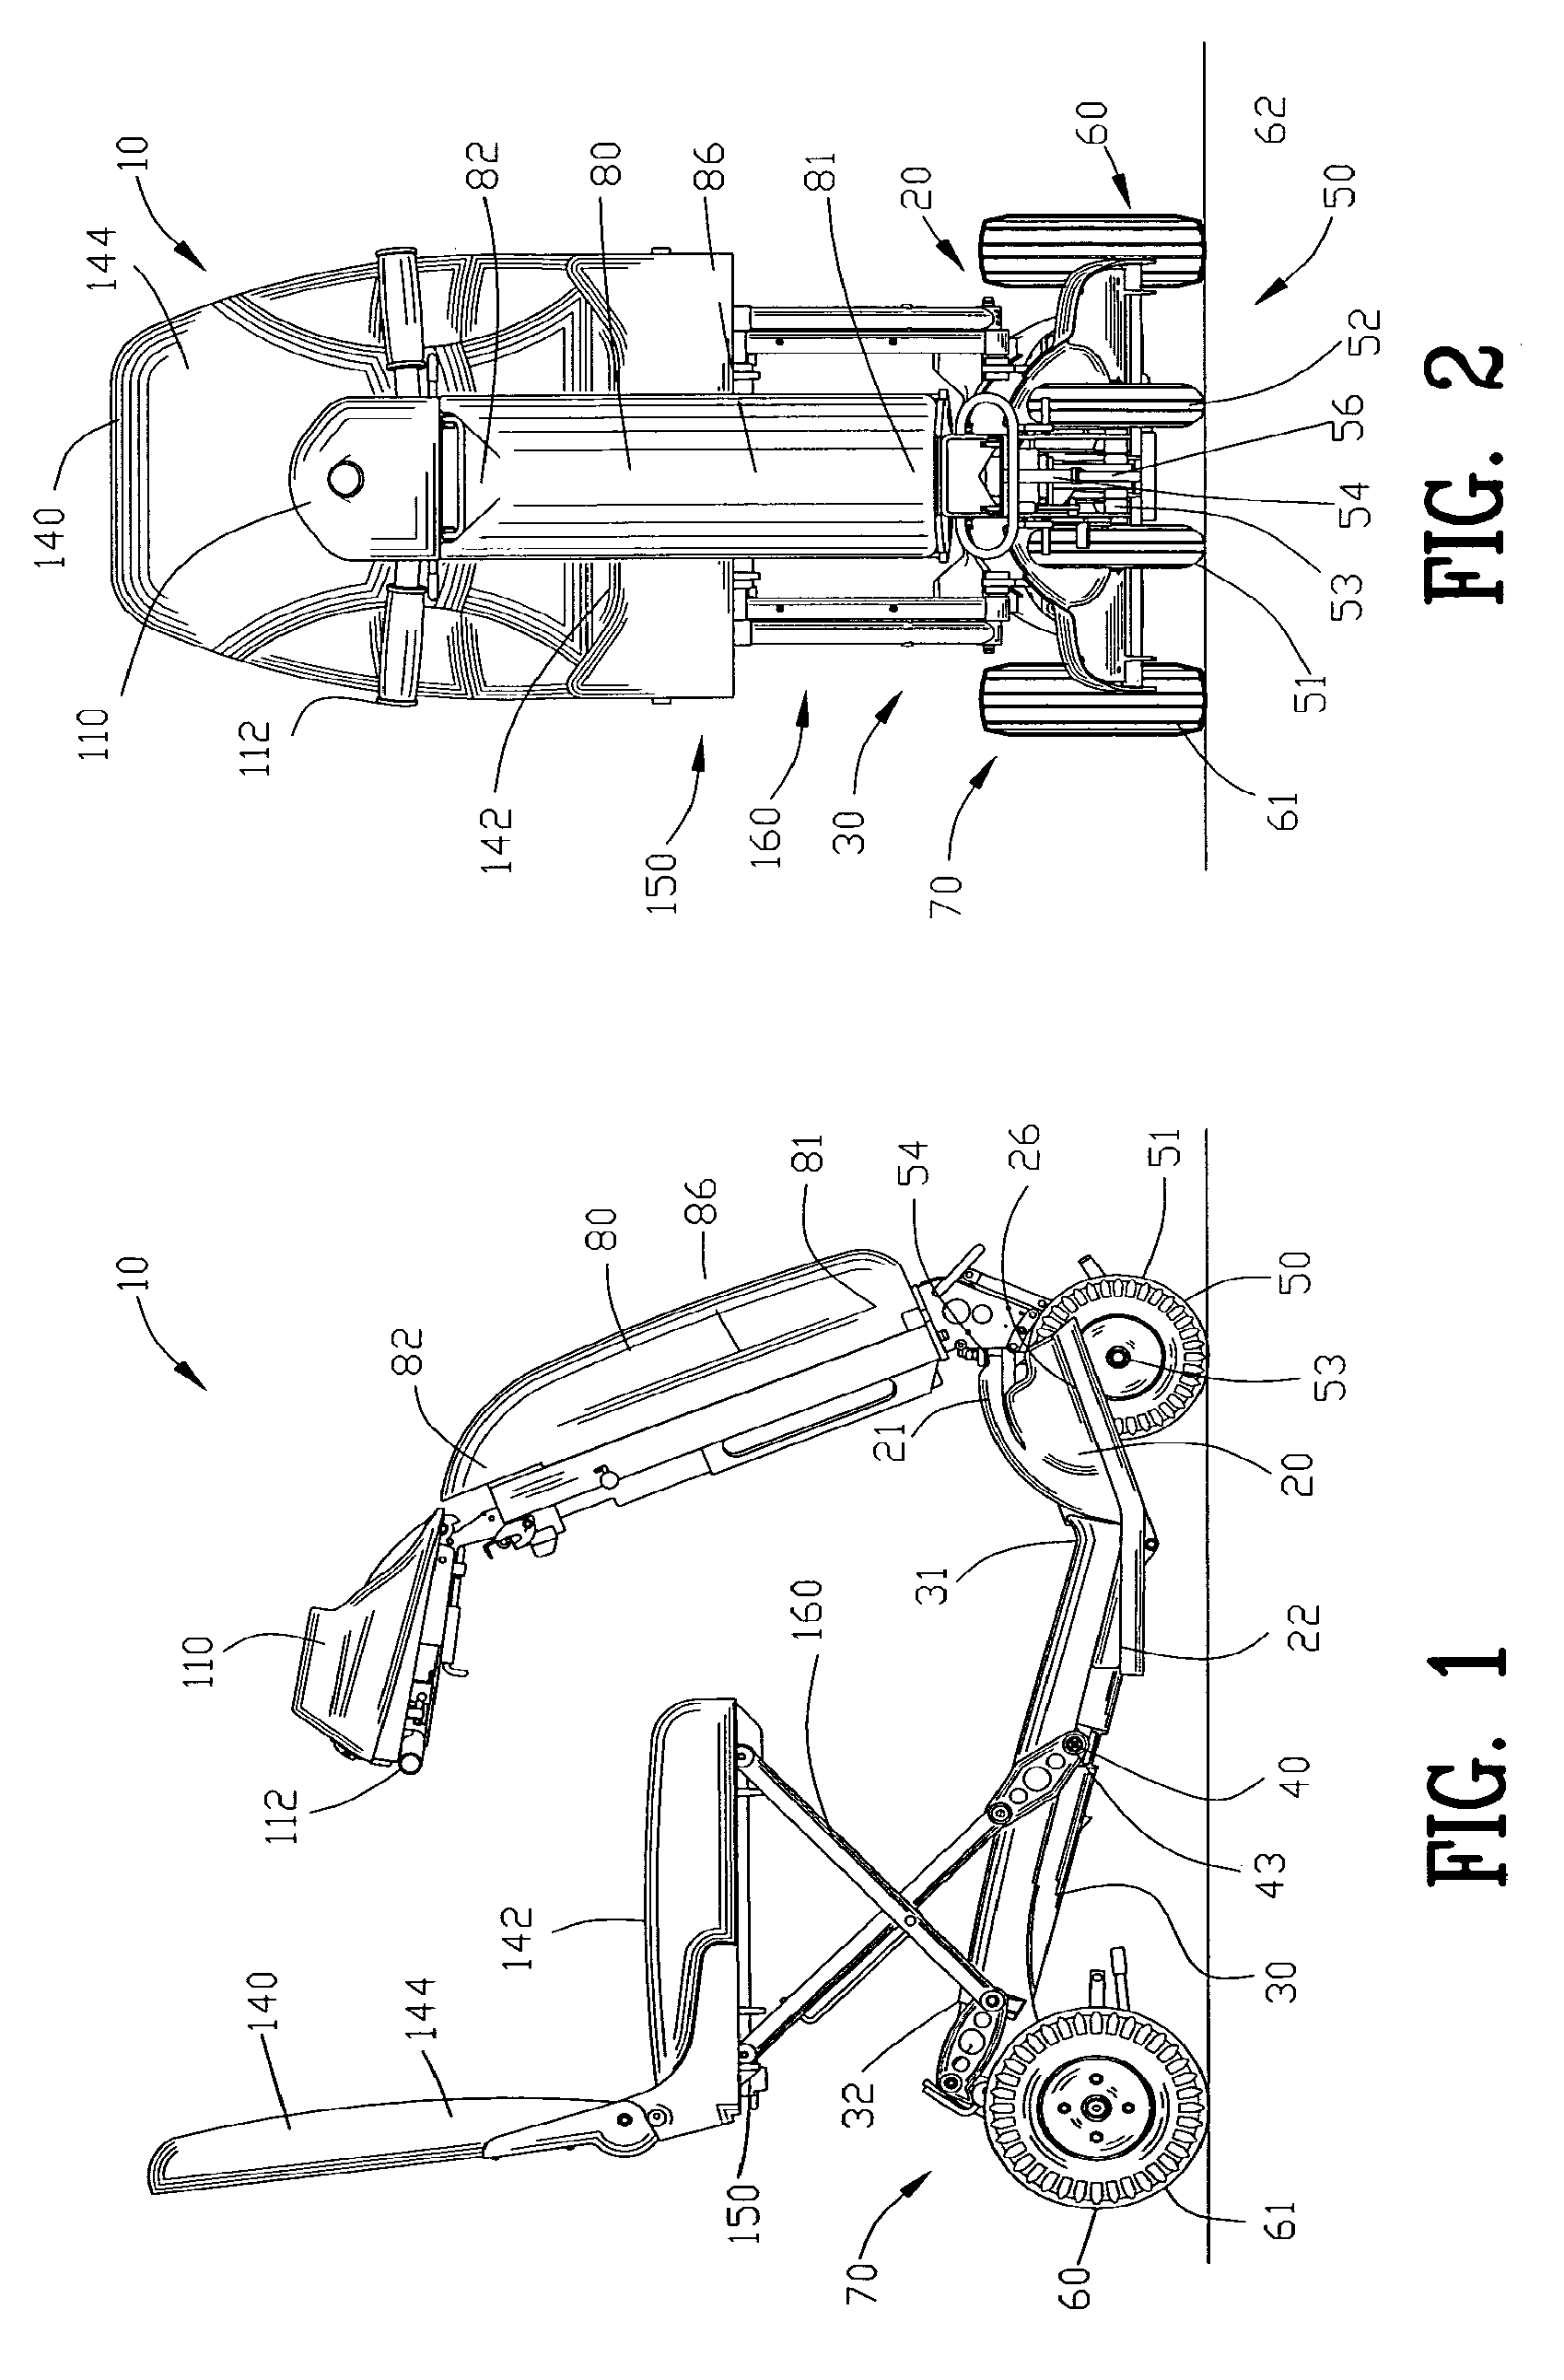 Foldable personal mobility vehicle